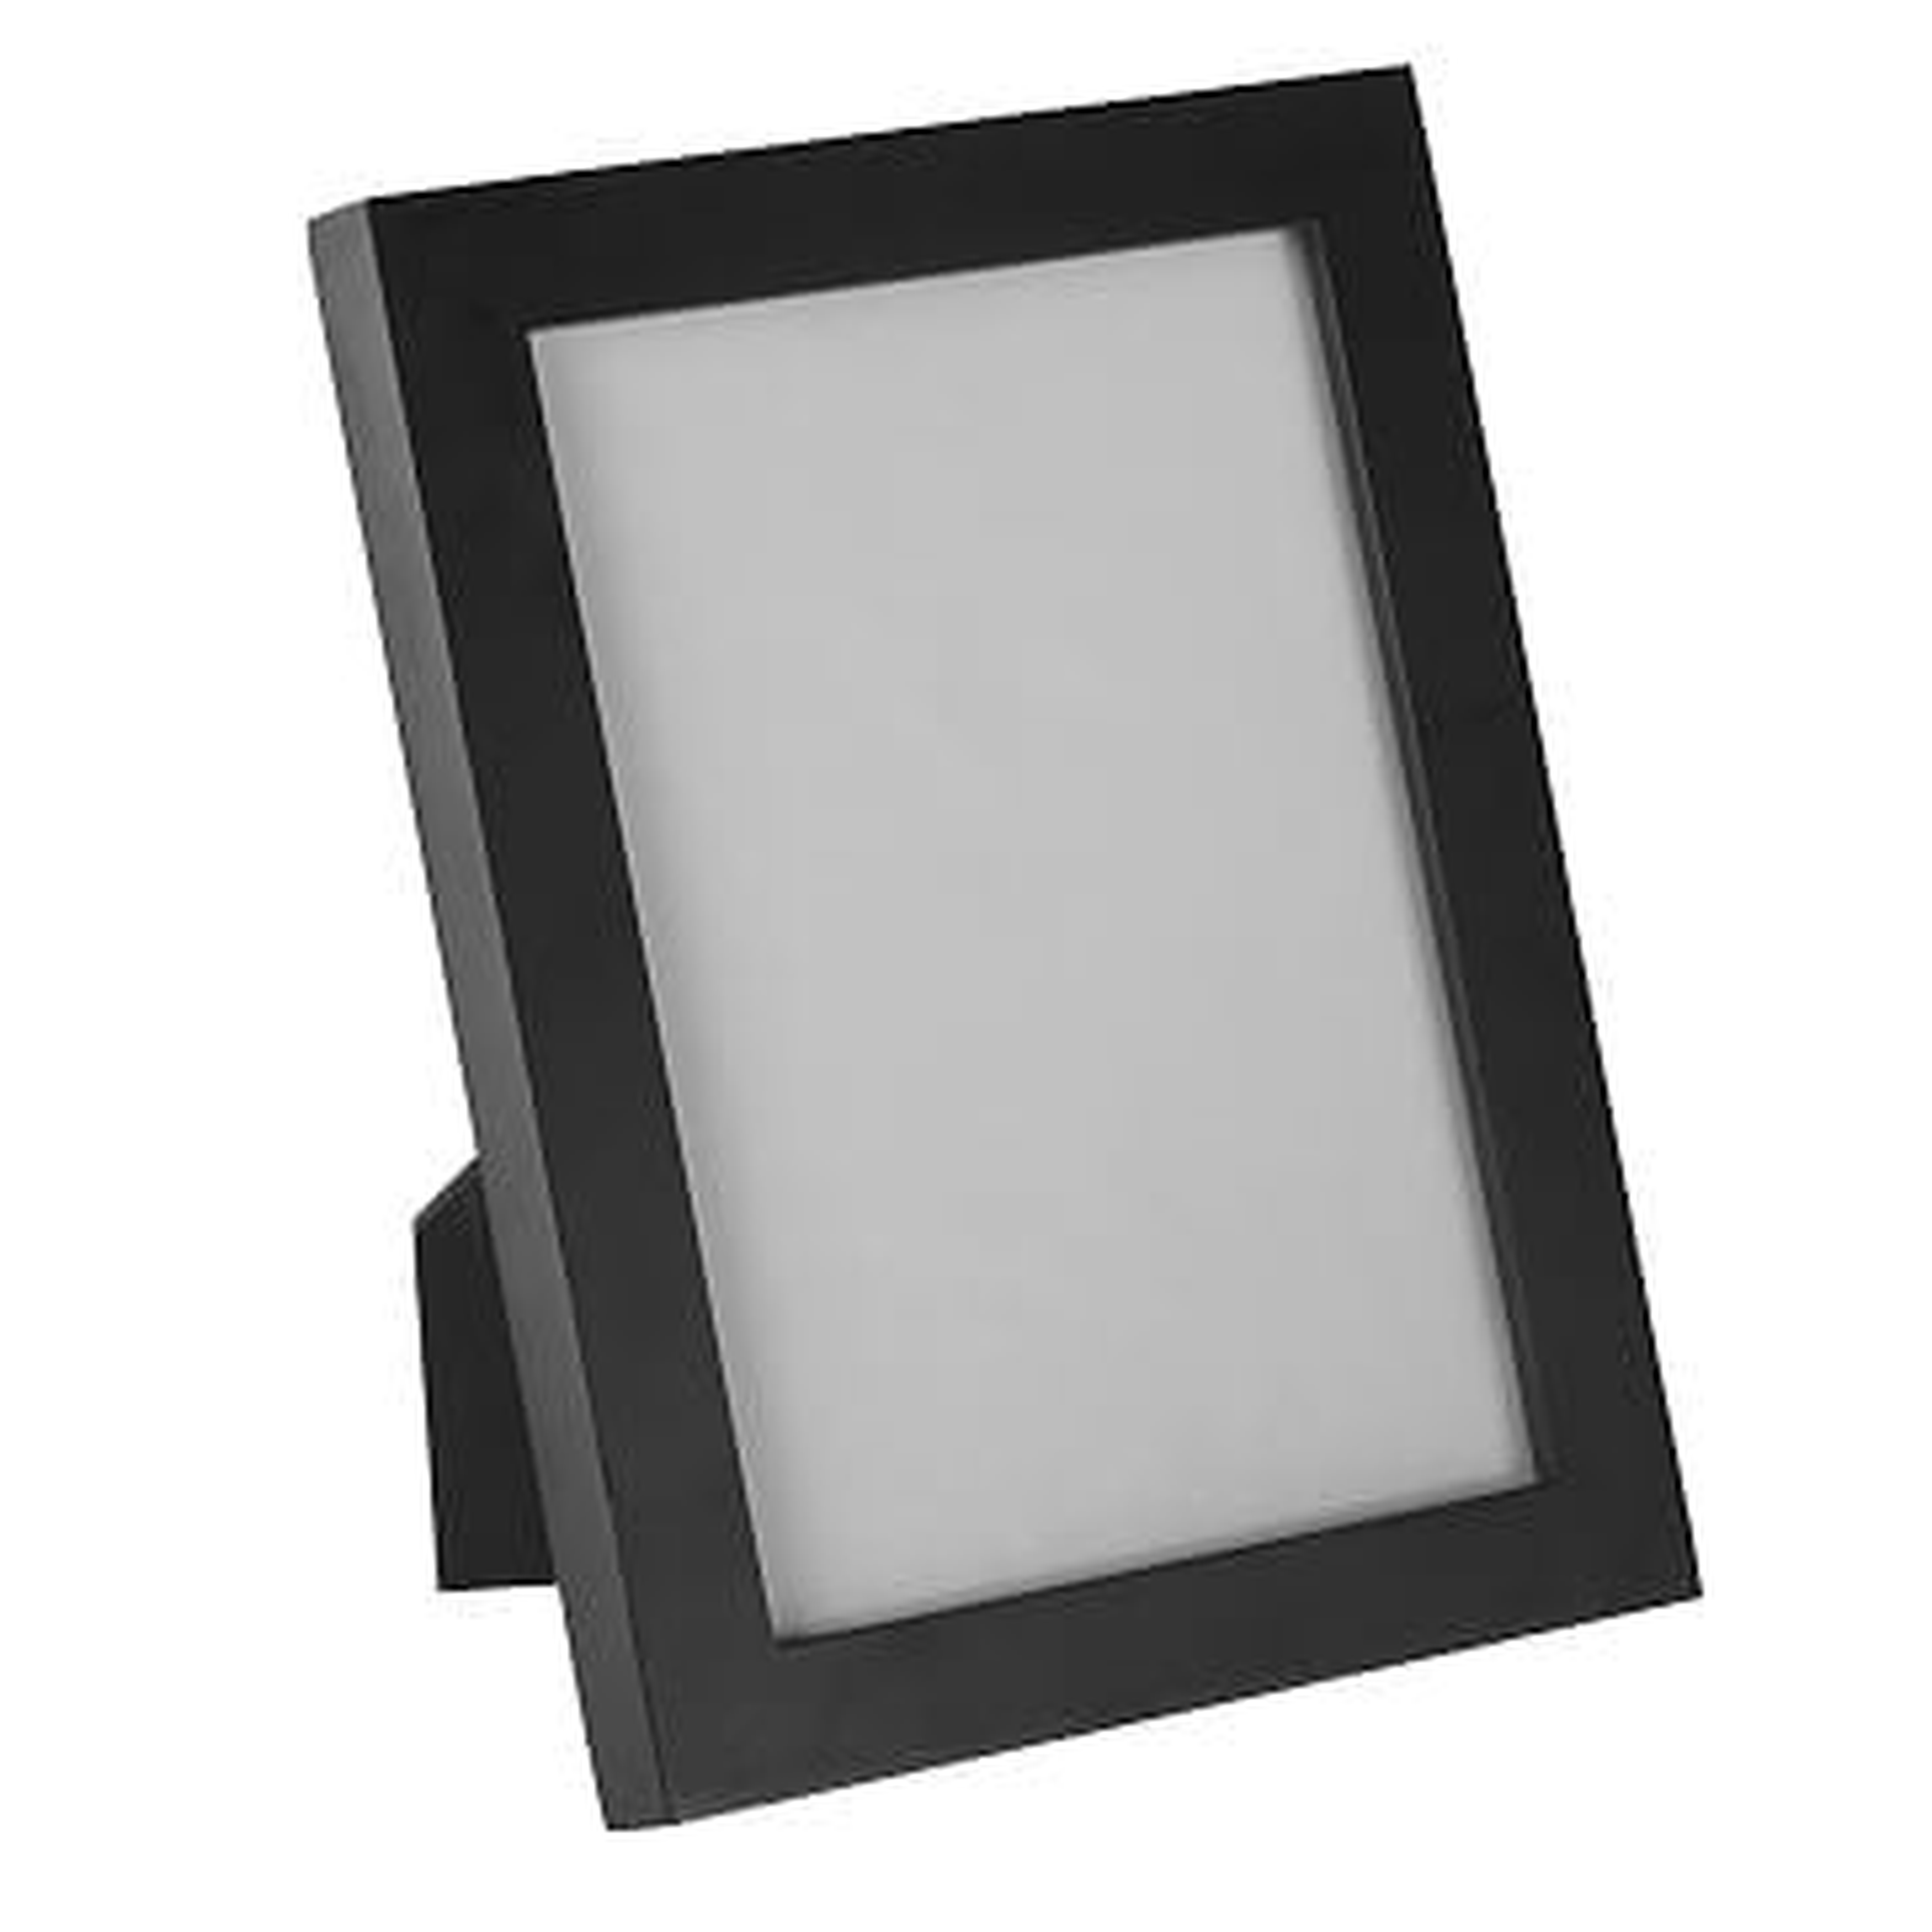 Gallery Frame, 4"x 6" (5" x 7" without mat), Black Lacquer - West Elm